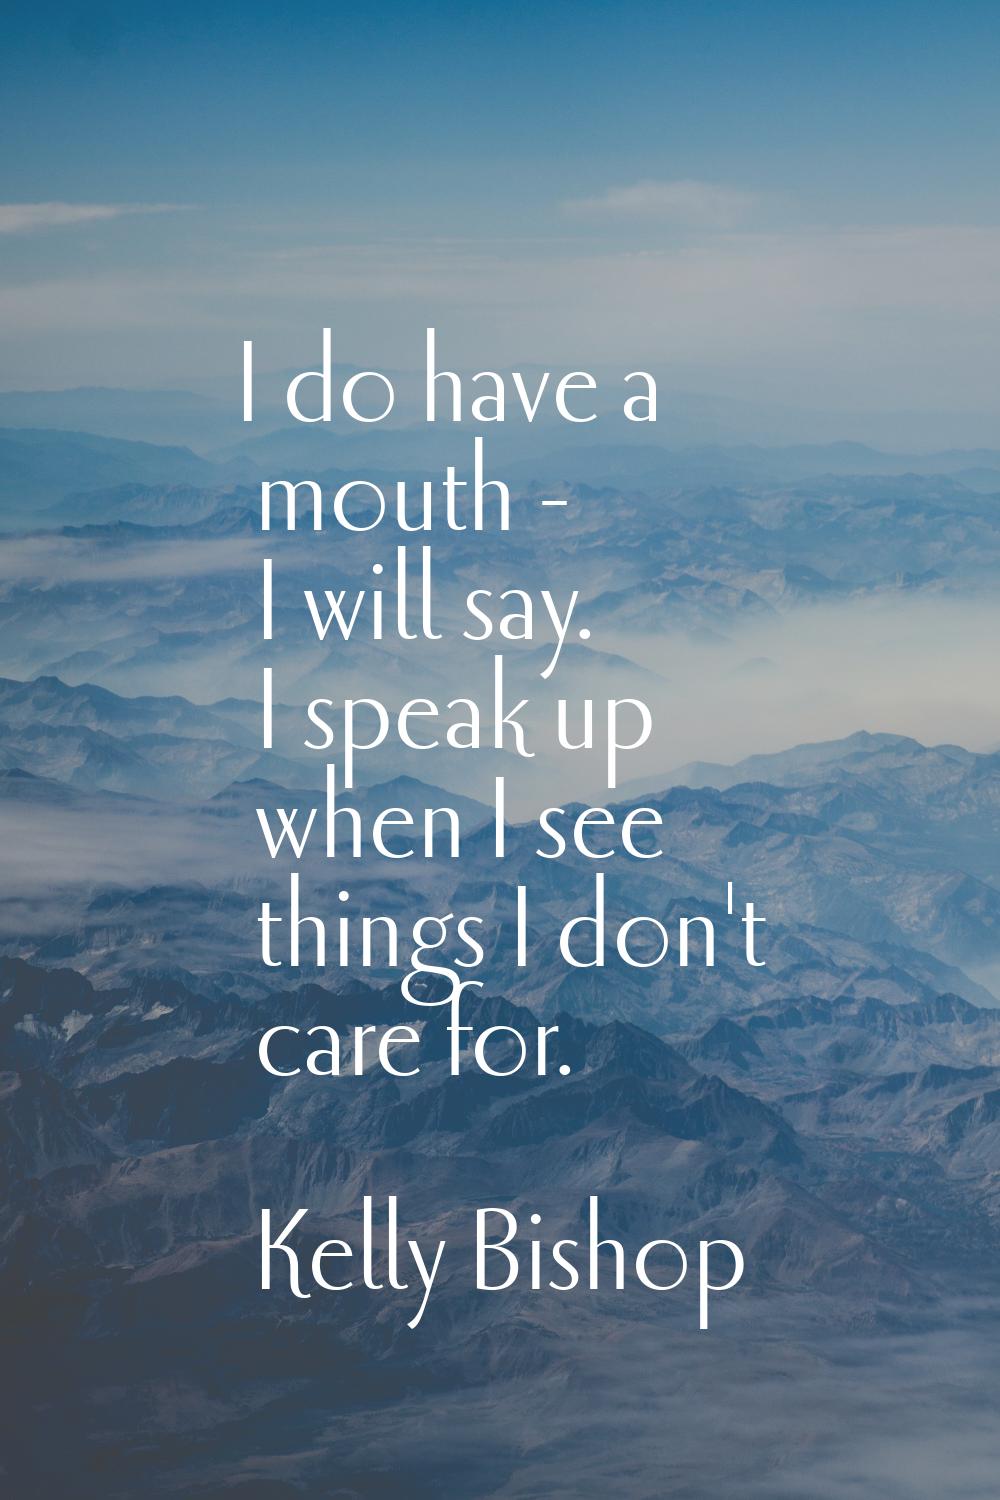 I do have a mouth - I will say. I speak up when I see things I don't care for.